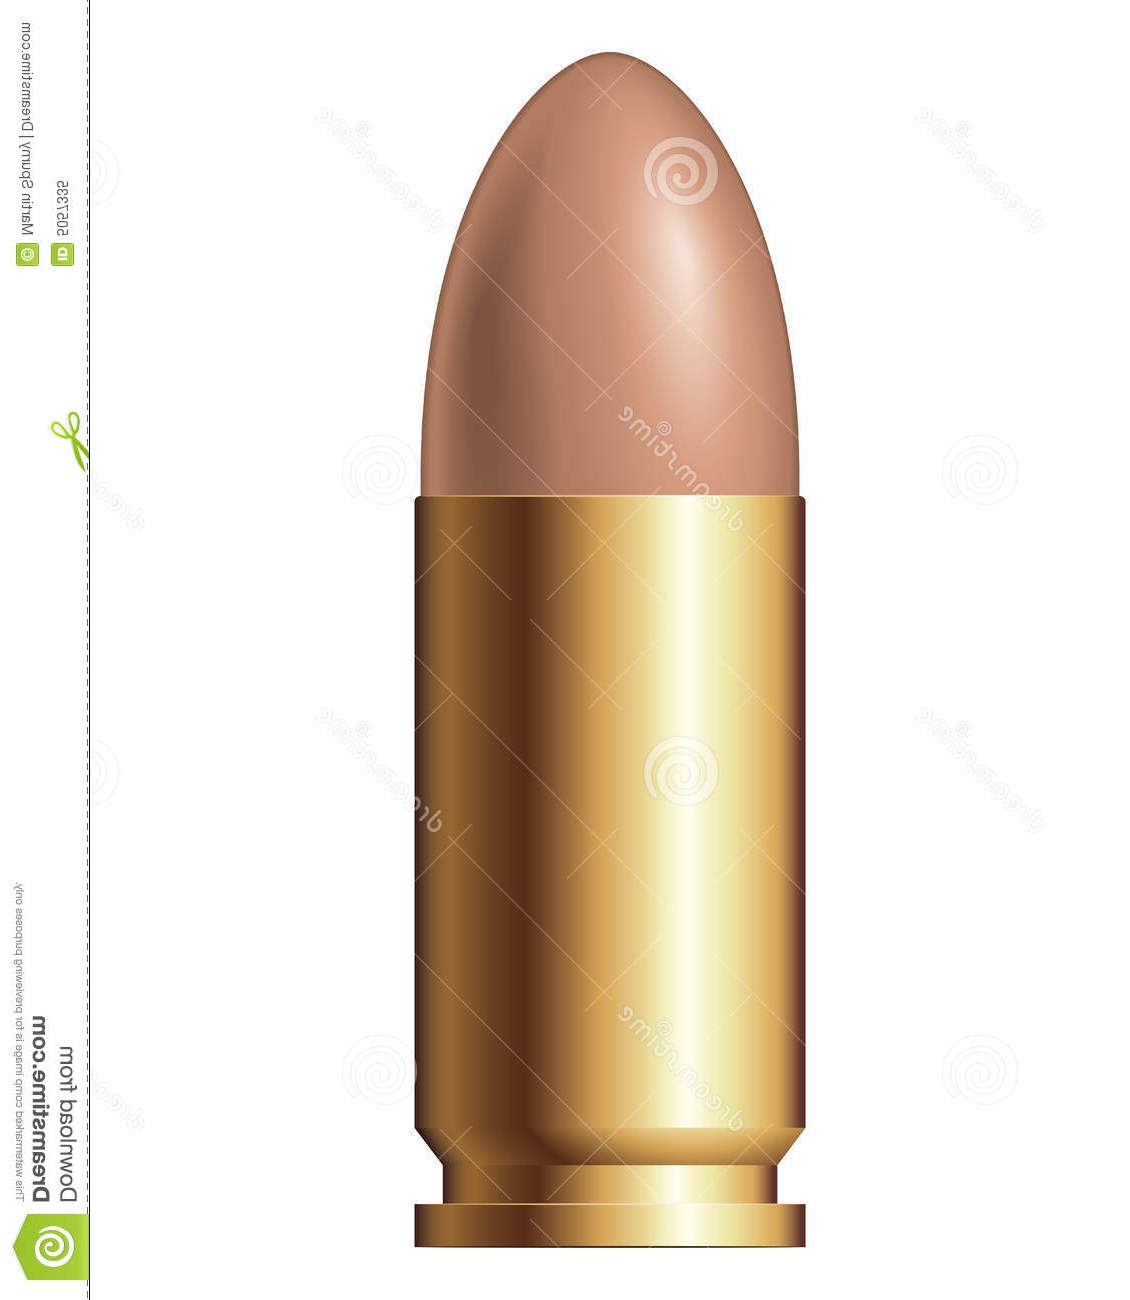 Mm free on dumielauxepices. Bullet clipart 9mm